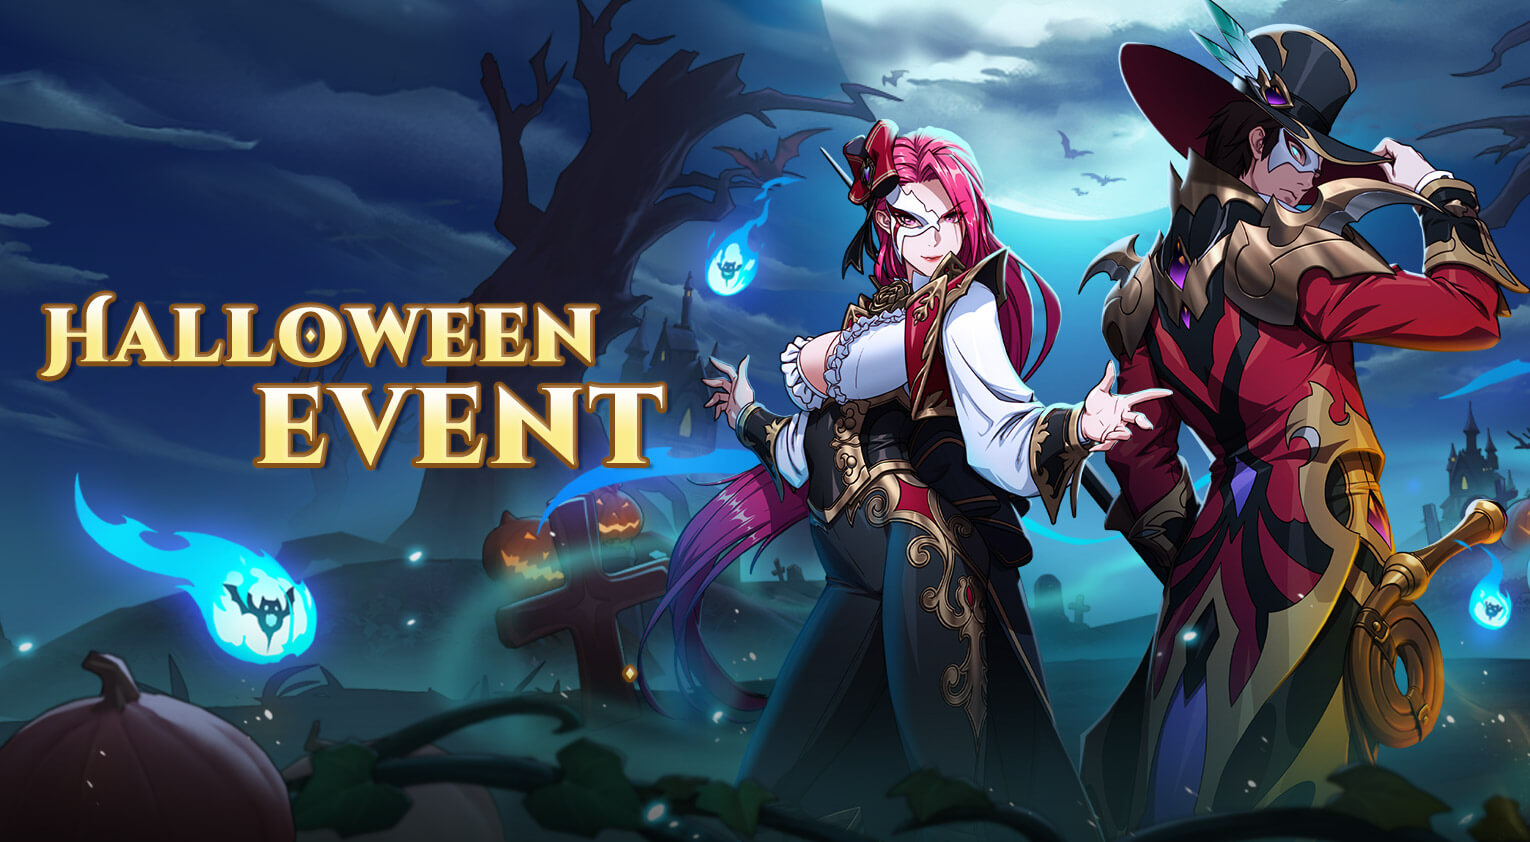 Mythic Heroes Halloween event